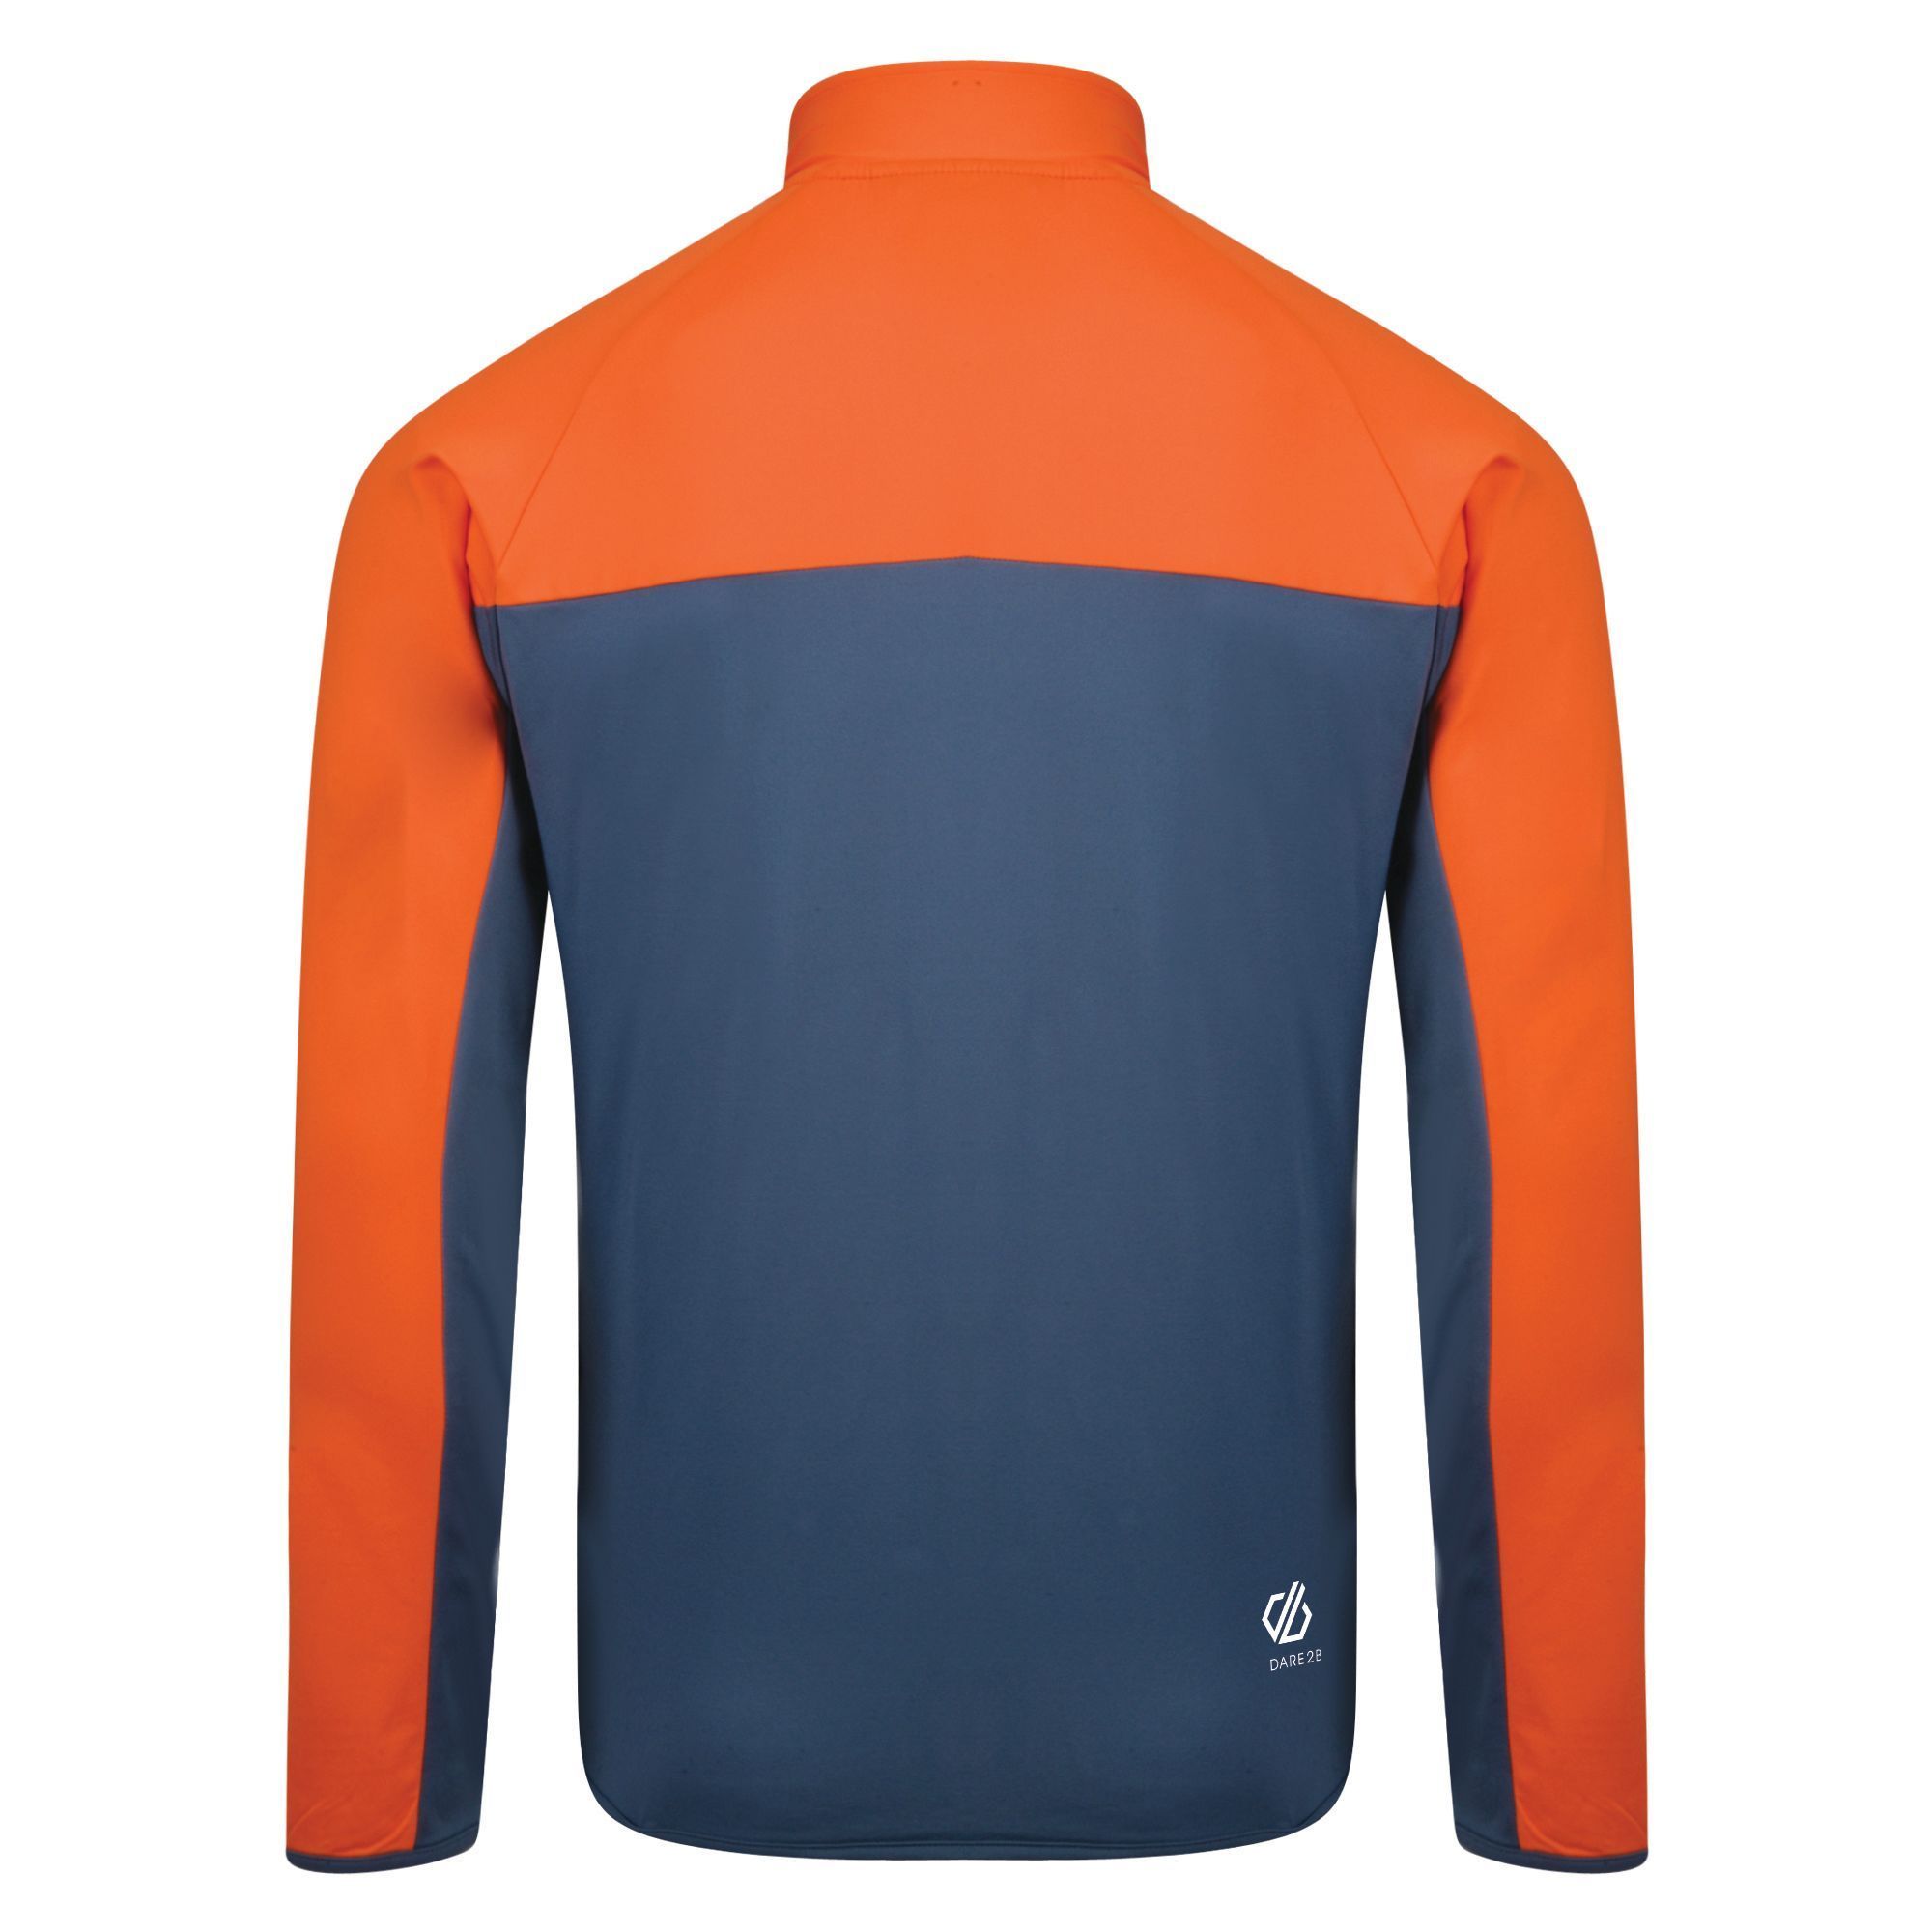 Polyester 97%, Elastane 3 %, Lightweight Ilus Core warm backed knitted stretch fabric with marl stripe mix. Quick drying. Inner zip & chin guard. 2 x lower zip pockets. Stretch binding to cuffs and hem.